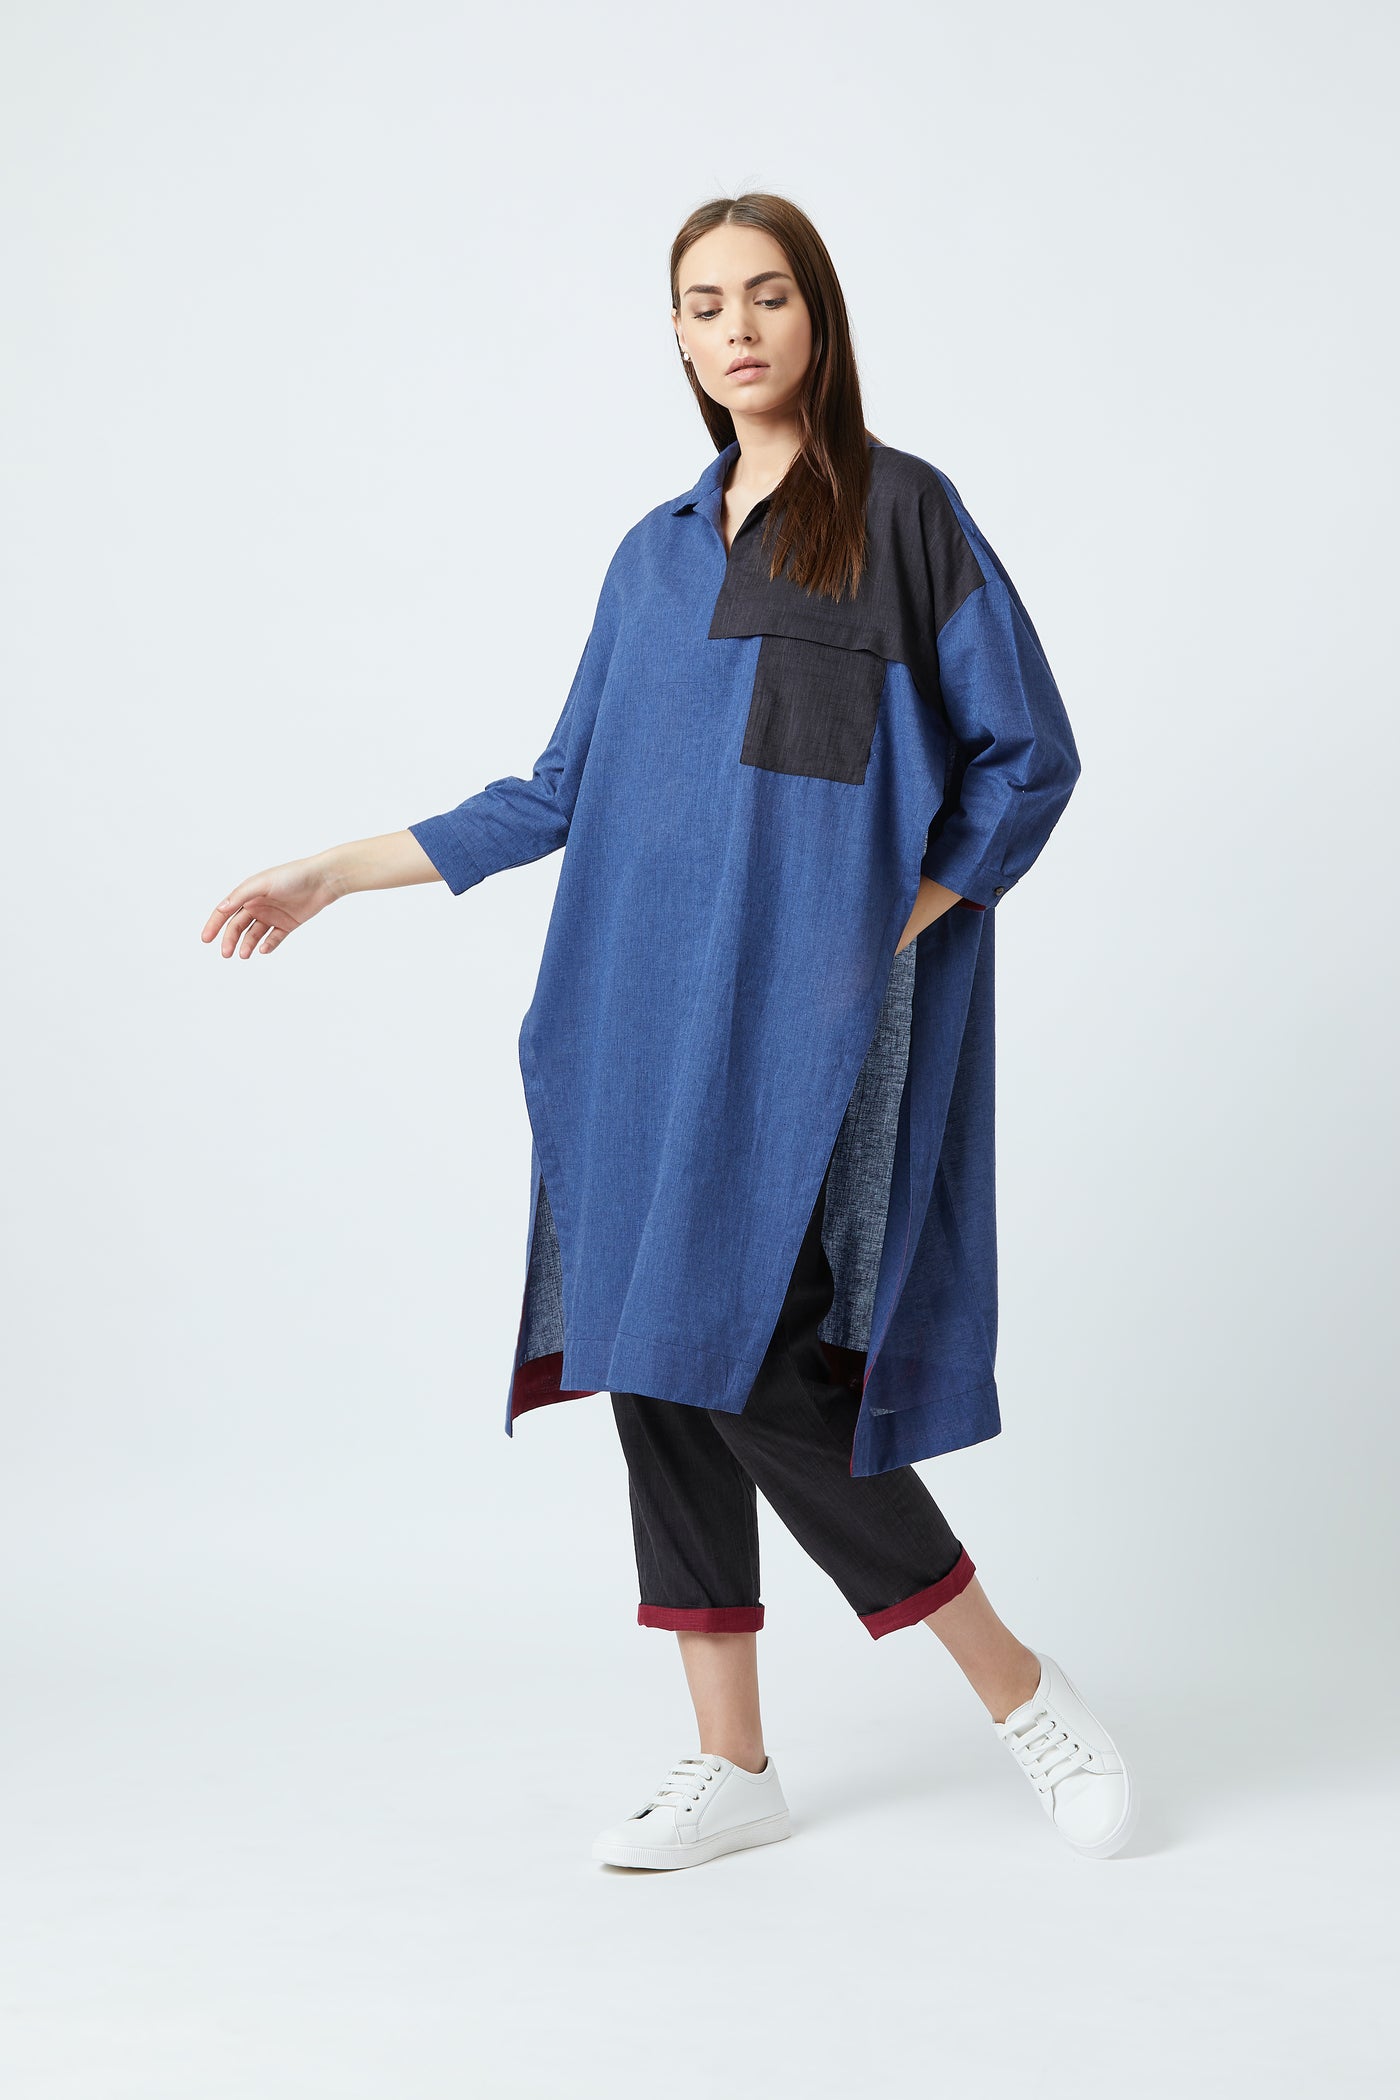 blue oversized tunic featuring long side slits and a black top pocket